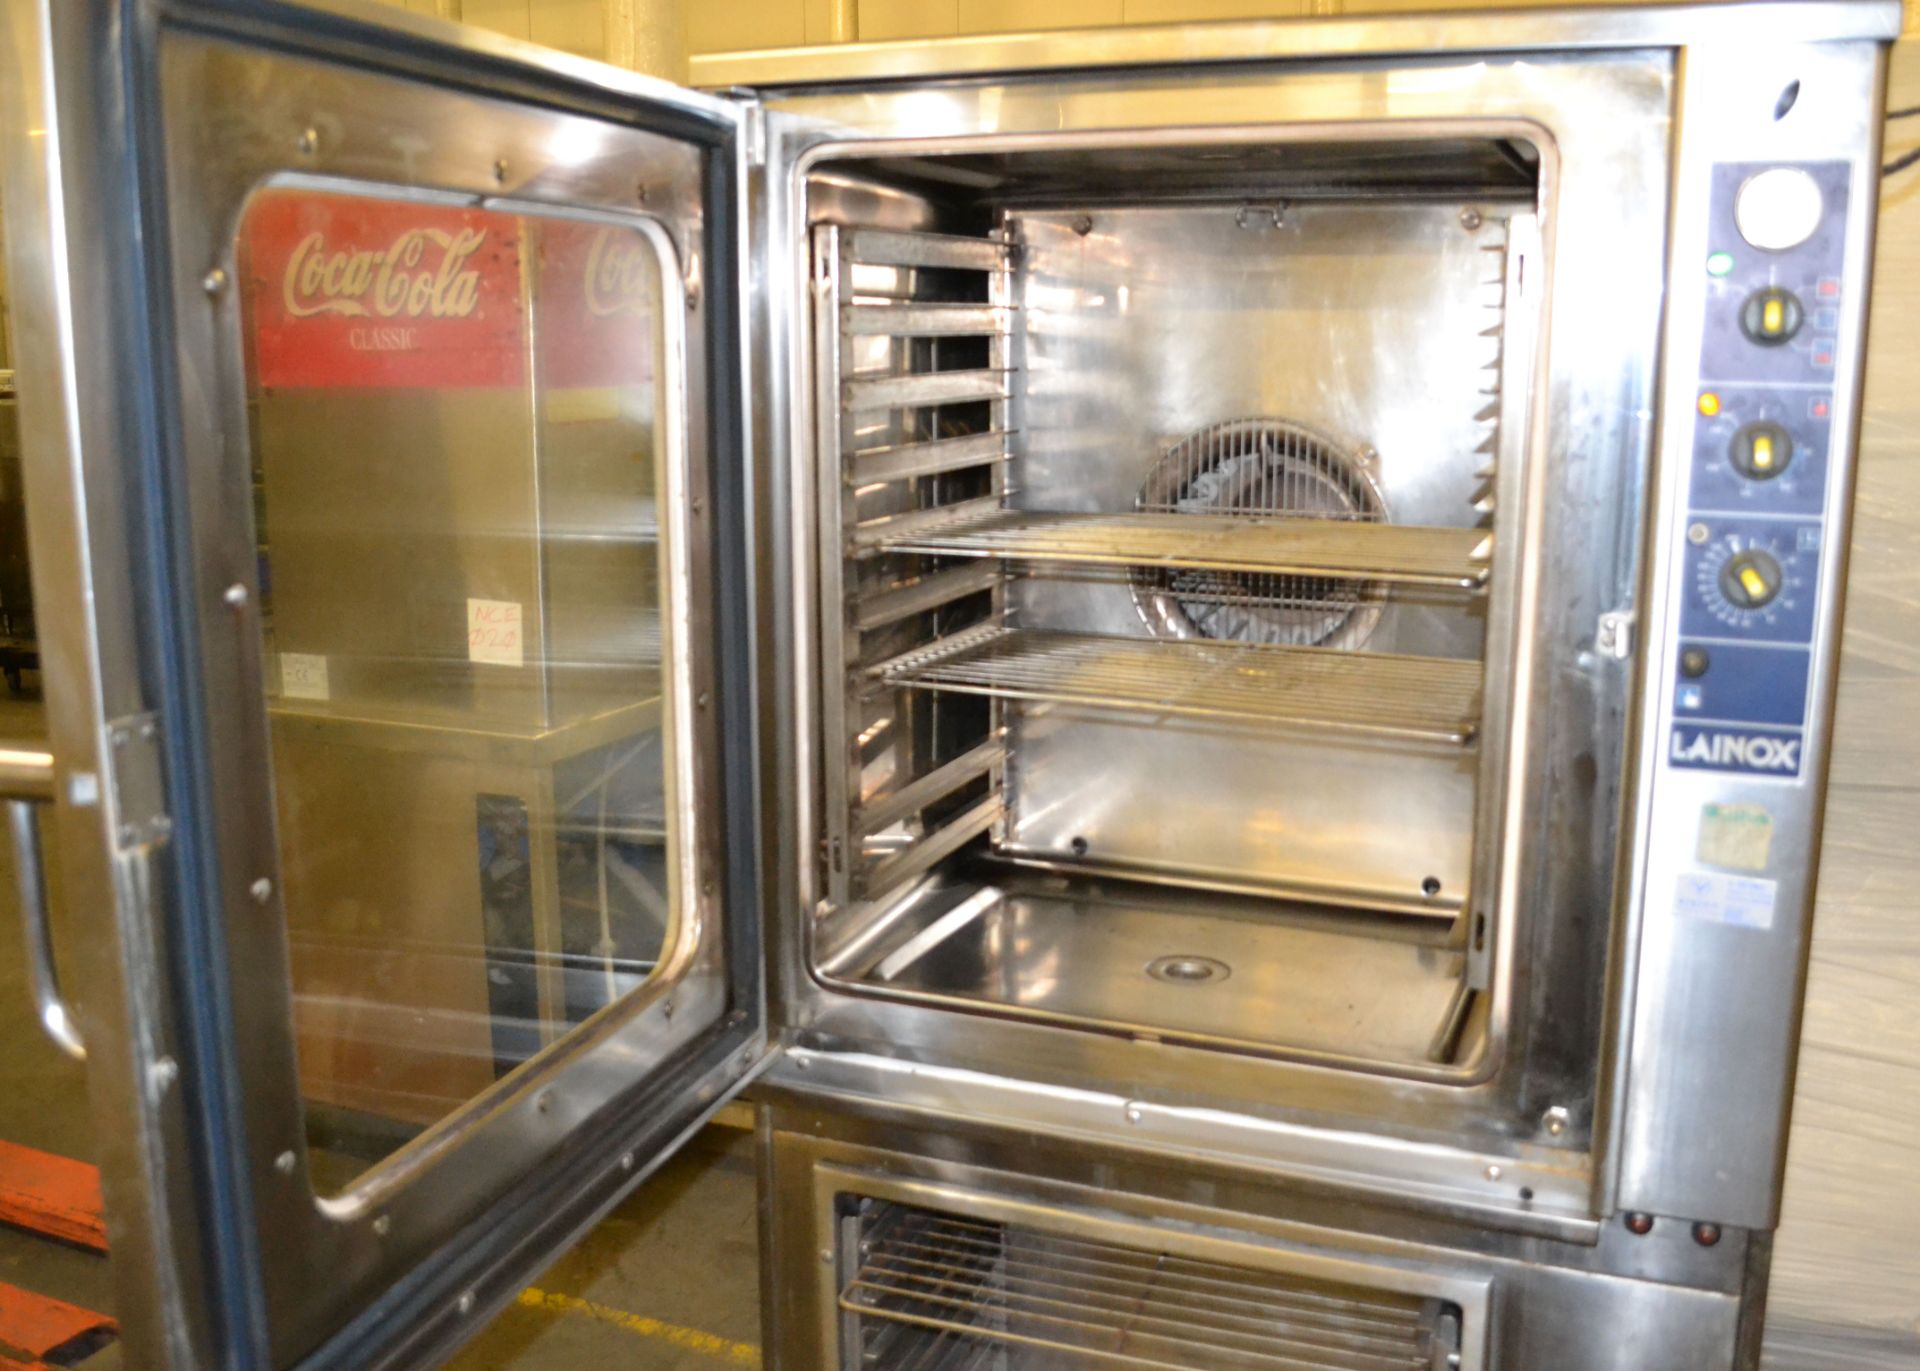 1 x Lainox MG110M LX Type Combination Oven with Pan Capacity - Ref:NCE032 - CL007 - Location: Bolton - Image 15 of 15